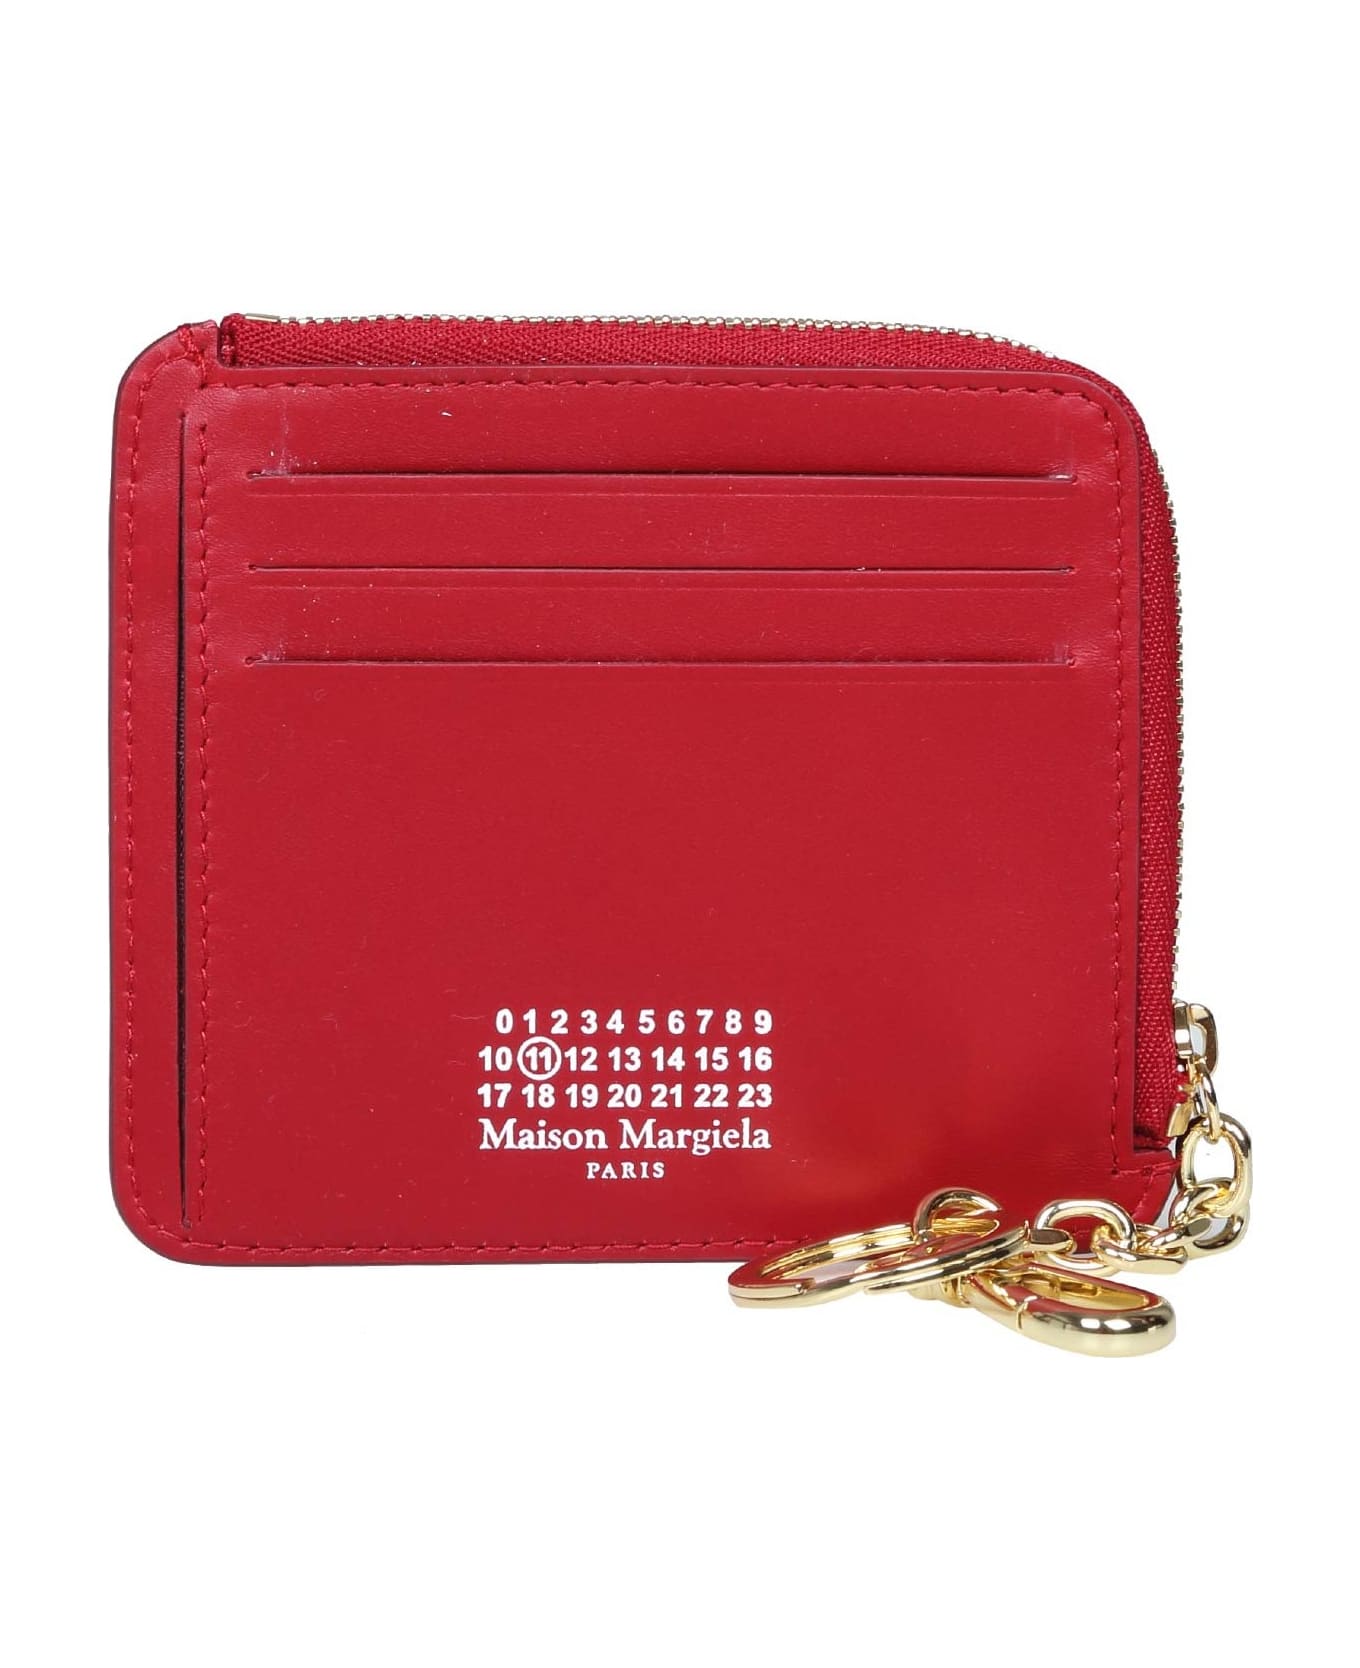 Maison Margiela Leather Key Chain Wallet Color Red - Red 財布